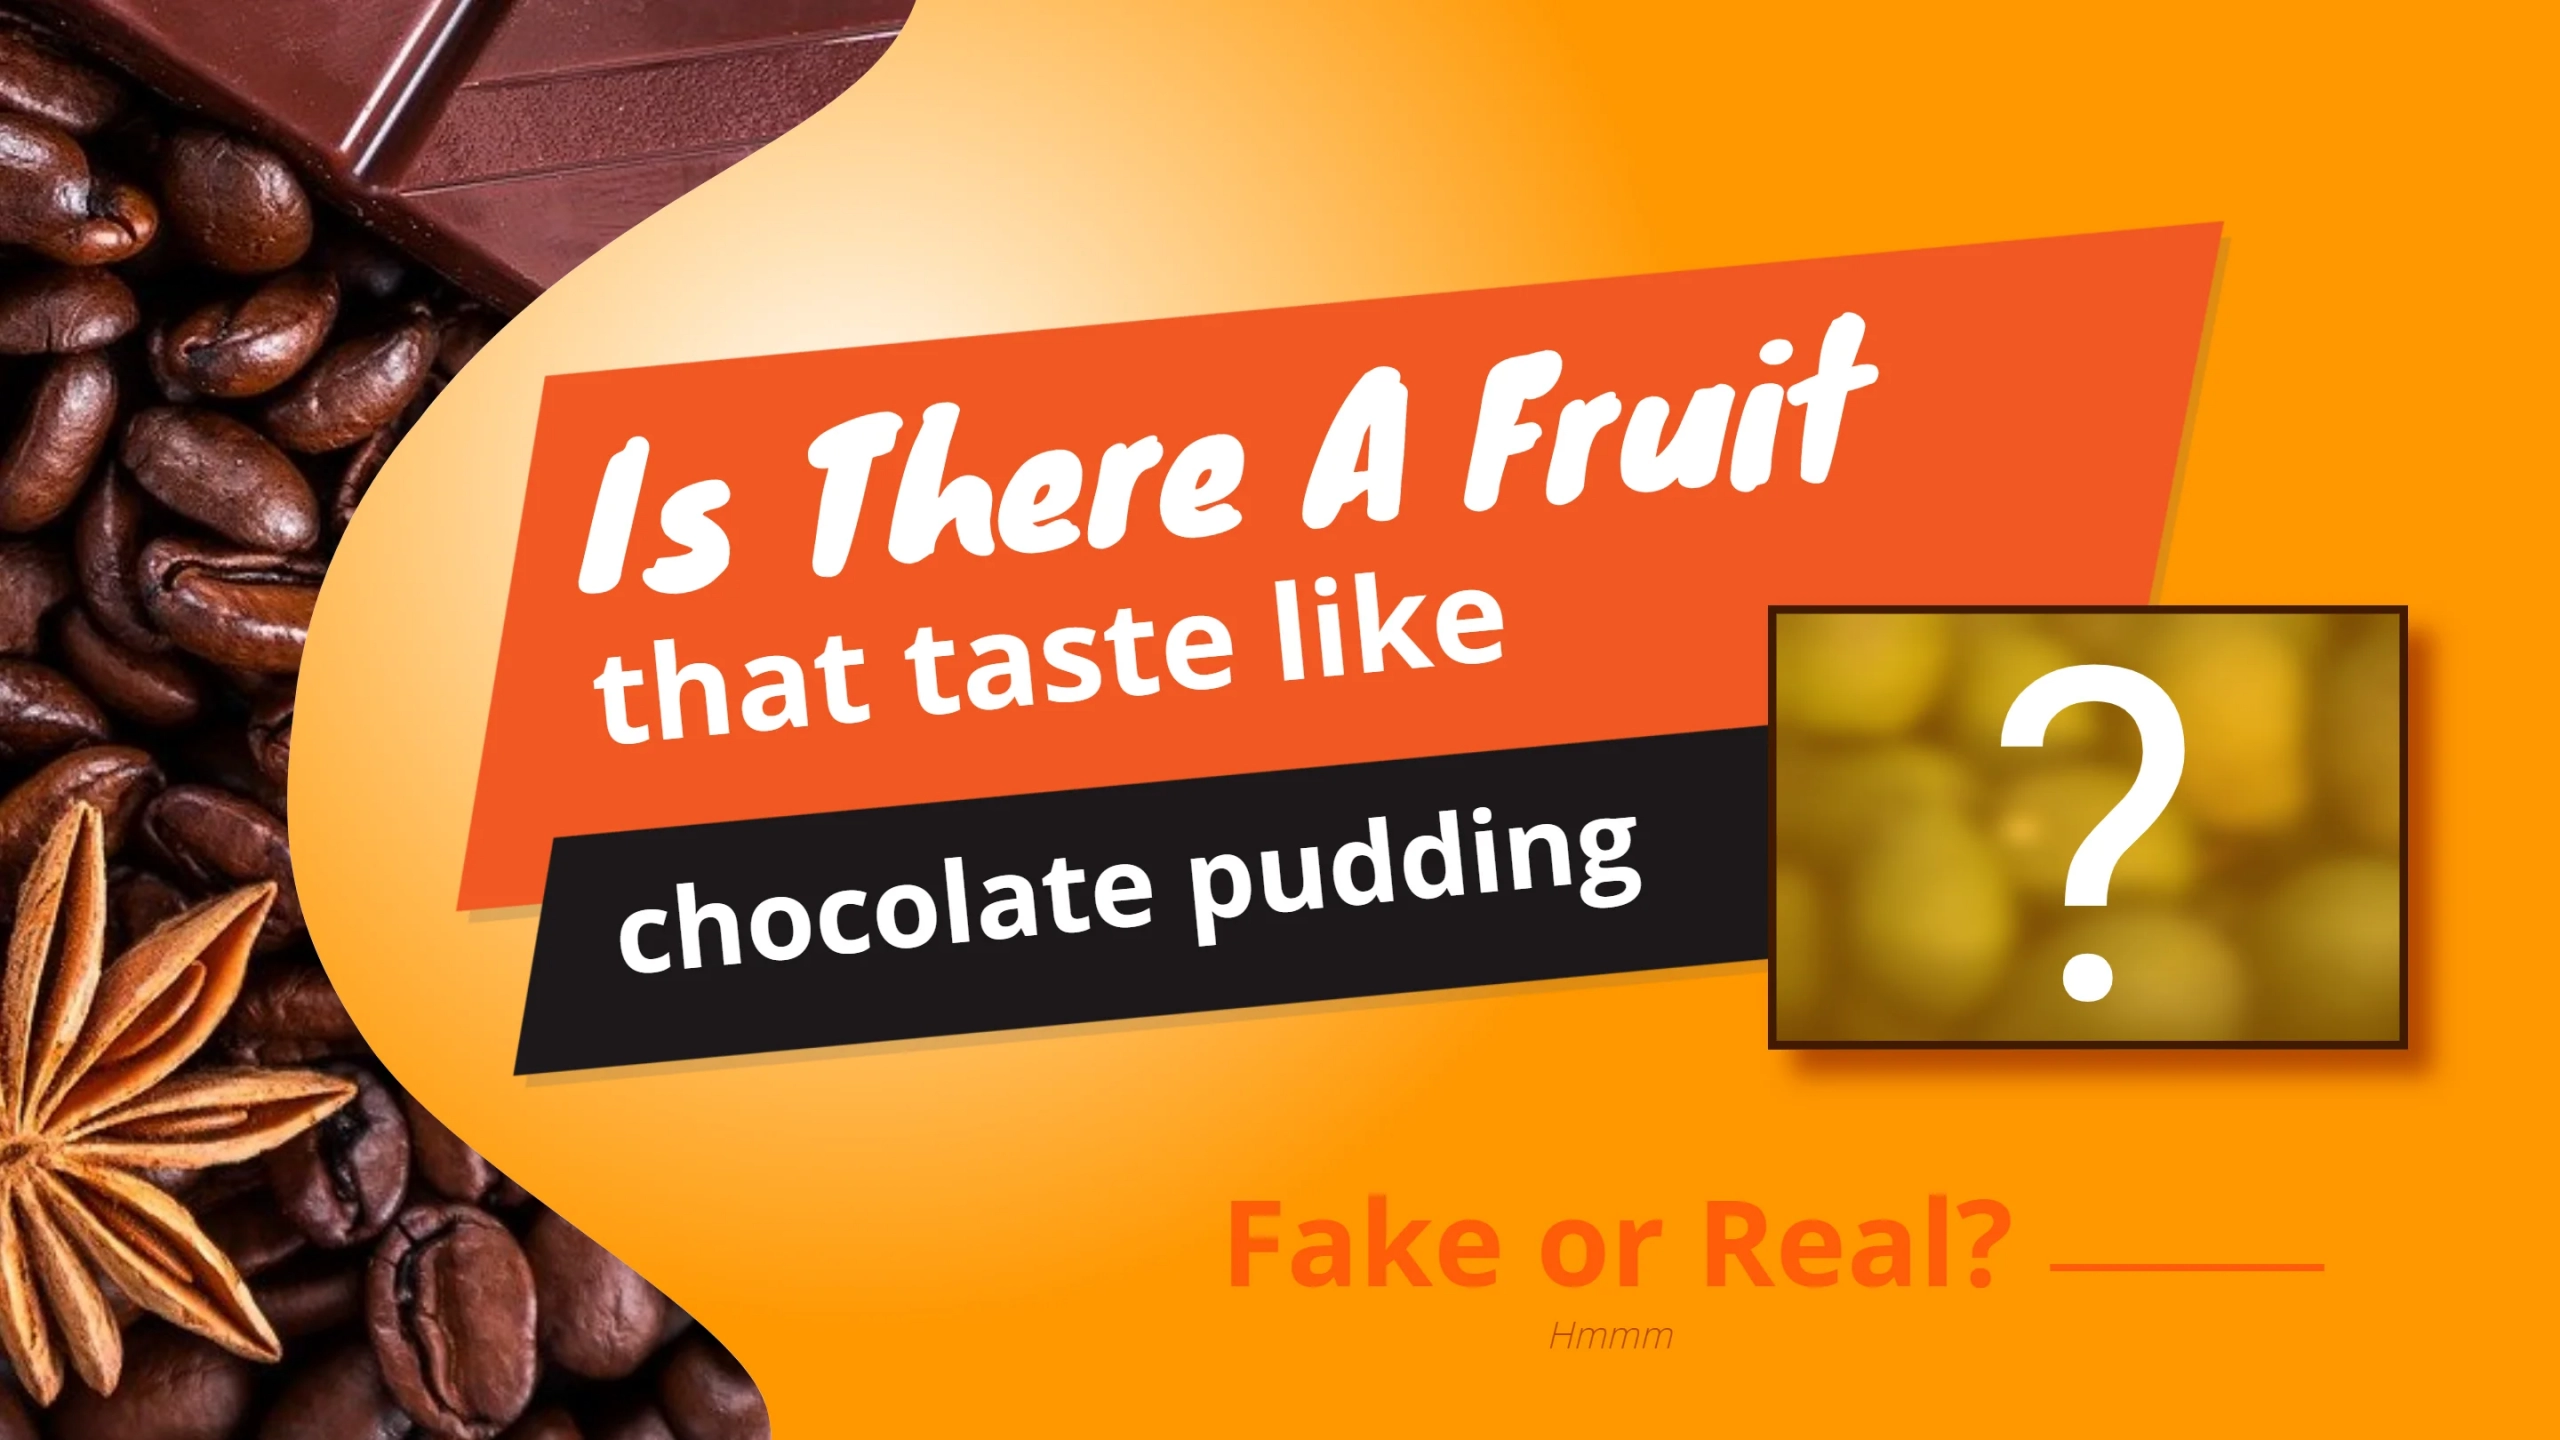 A Fruit That Taste Like Chocolate Pudding?